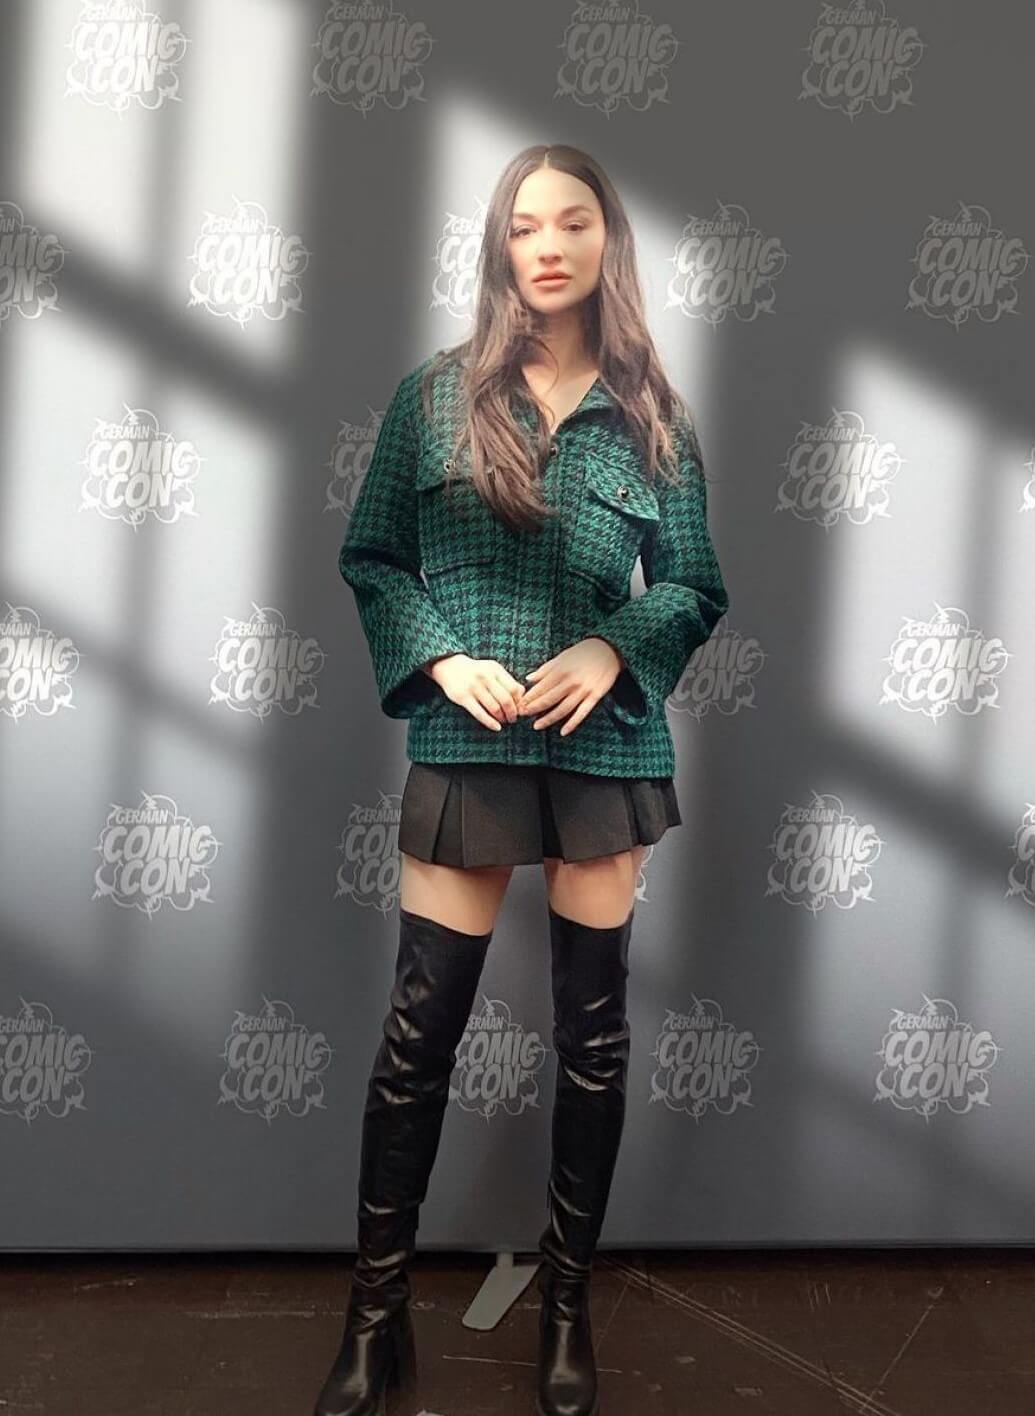 Crystal Reed  In Green Checked Coat & Pleated Mini Skirt With Black Long Boots At Photoshoot for German ComicCon